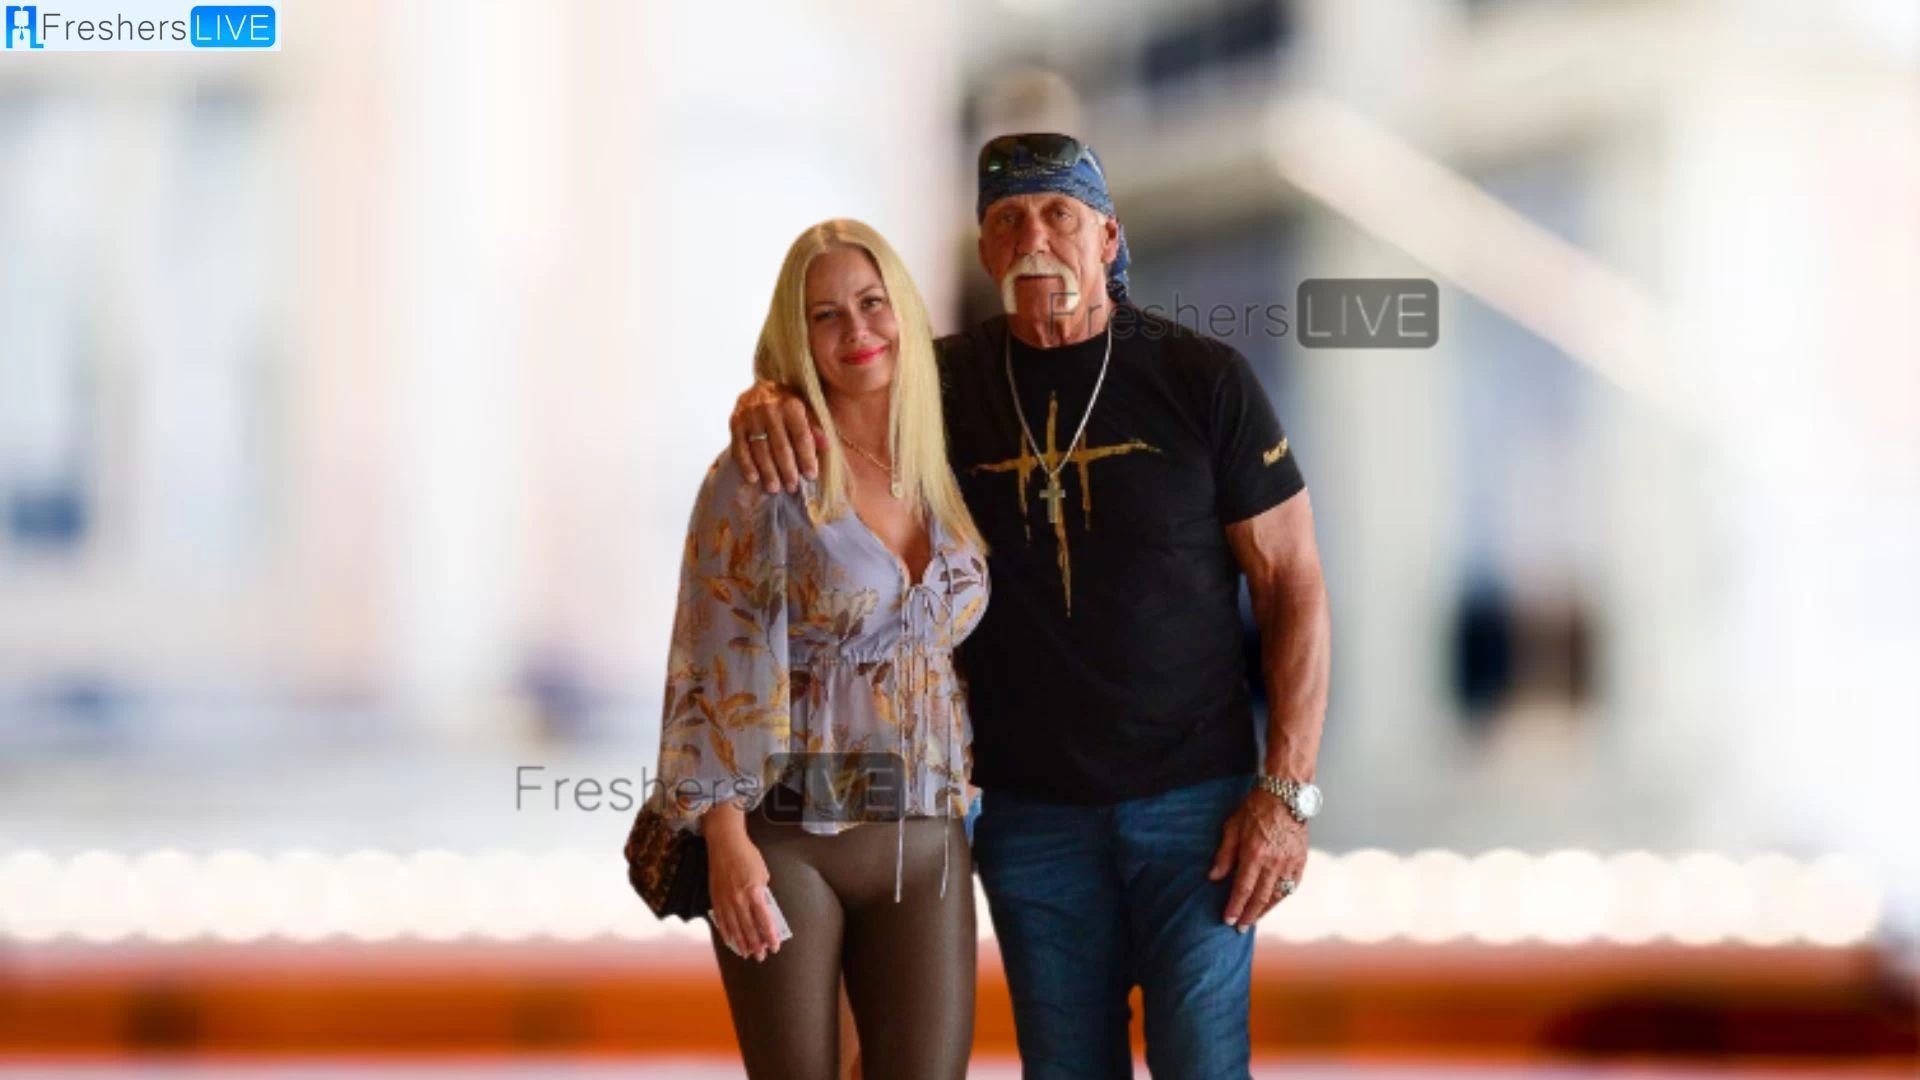 How Old is Hulk Hogan Wife Sky Daily? Who is Sky Daily?